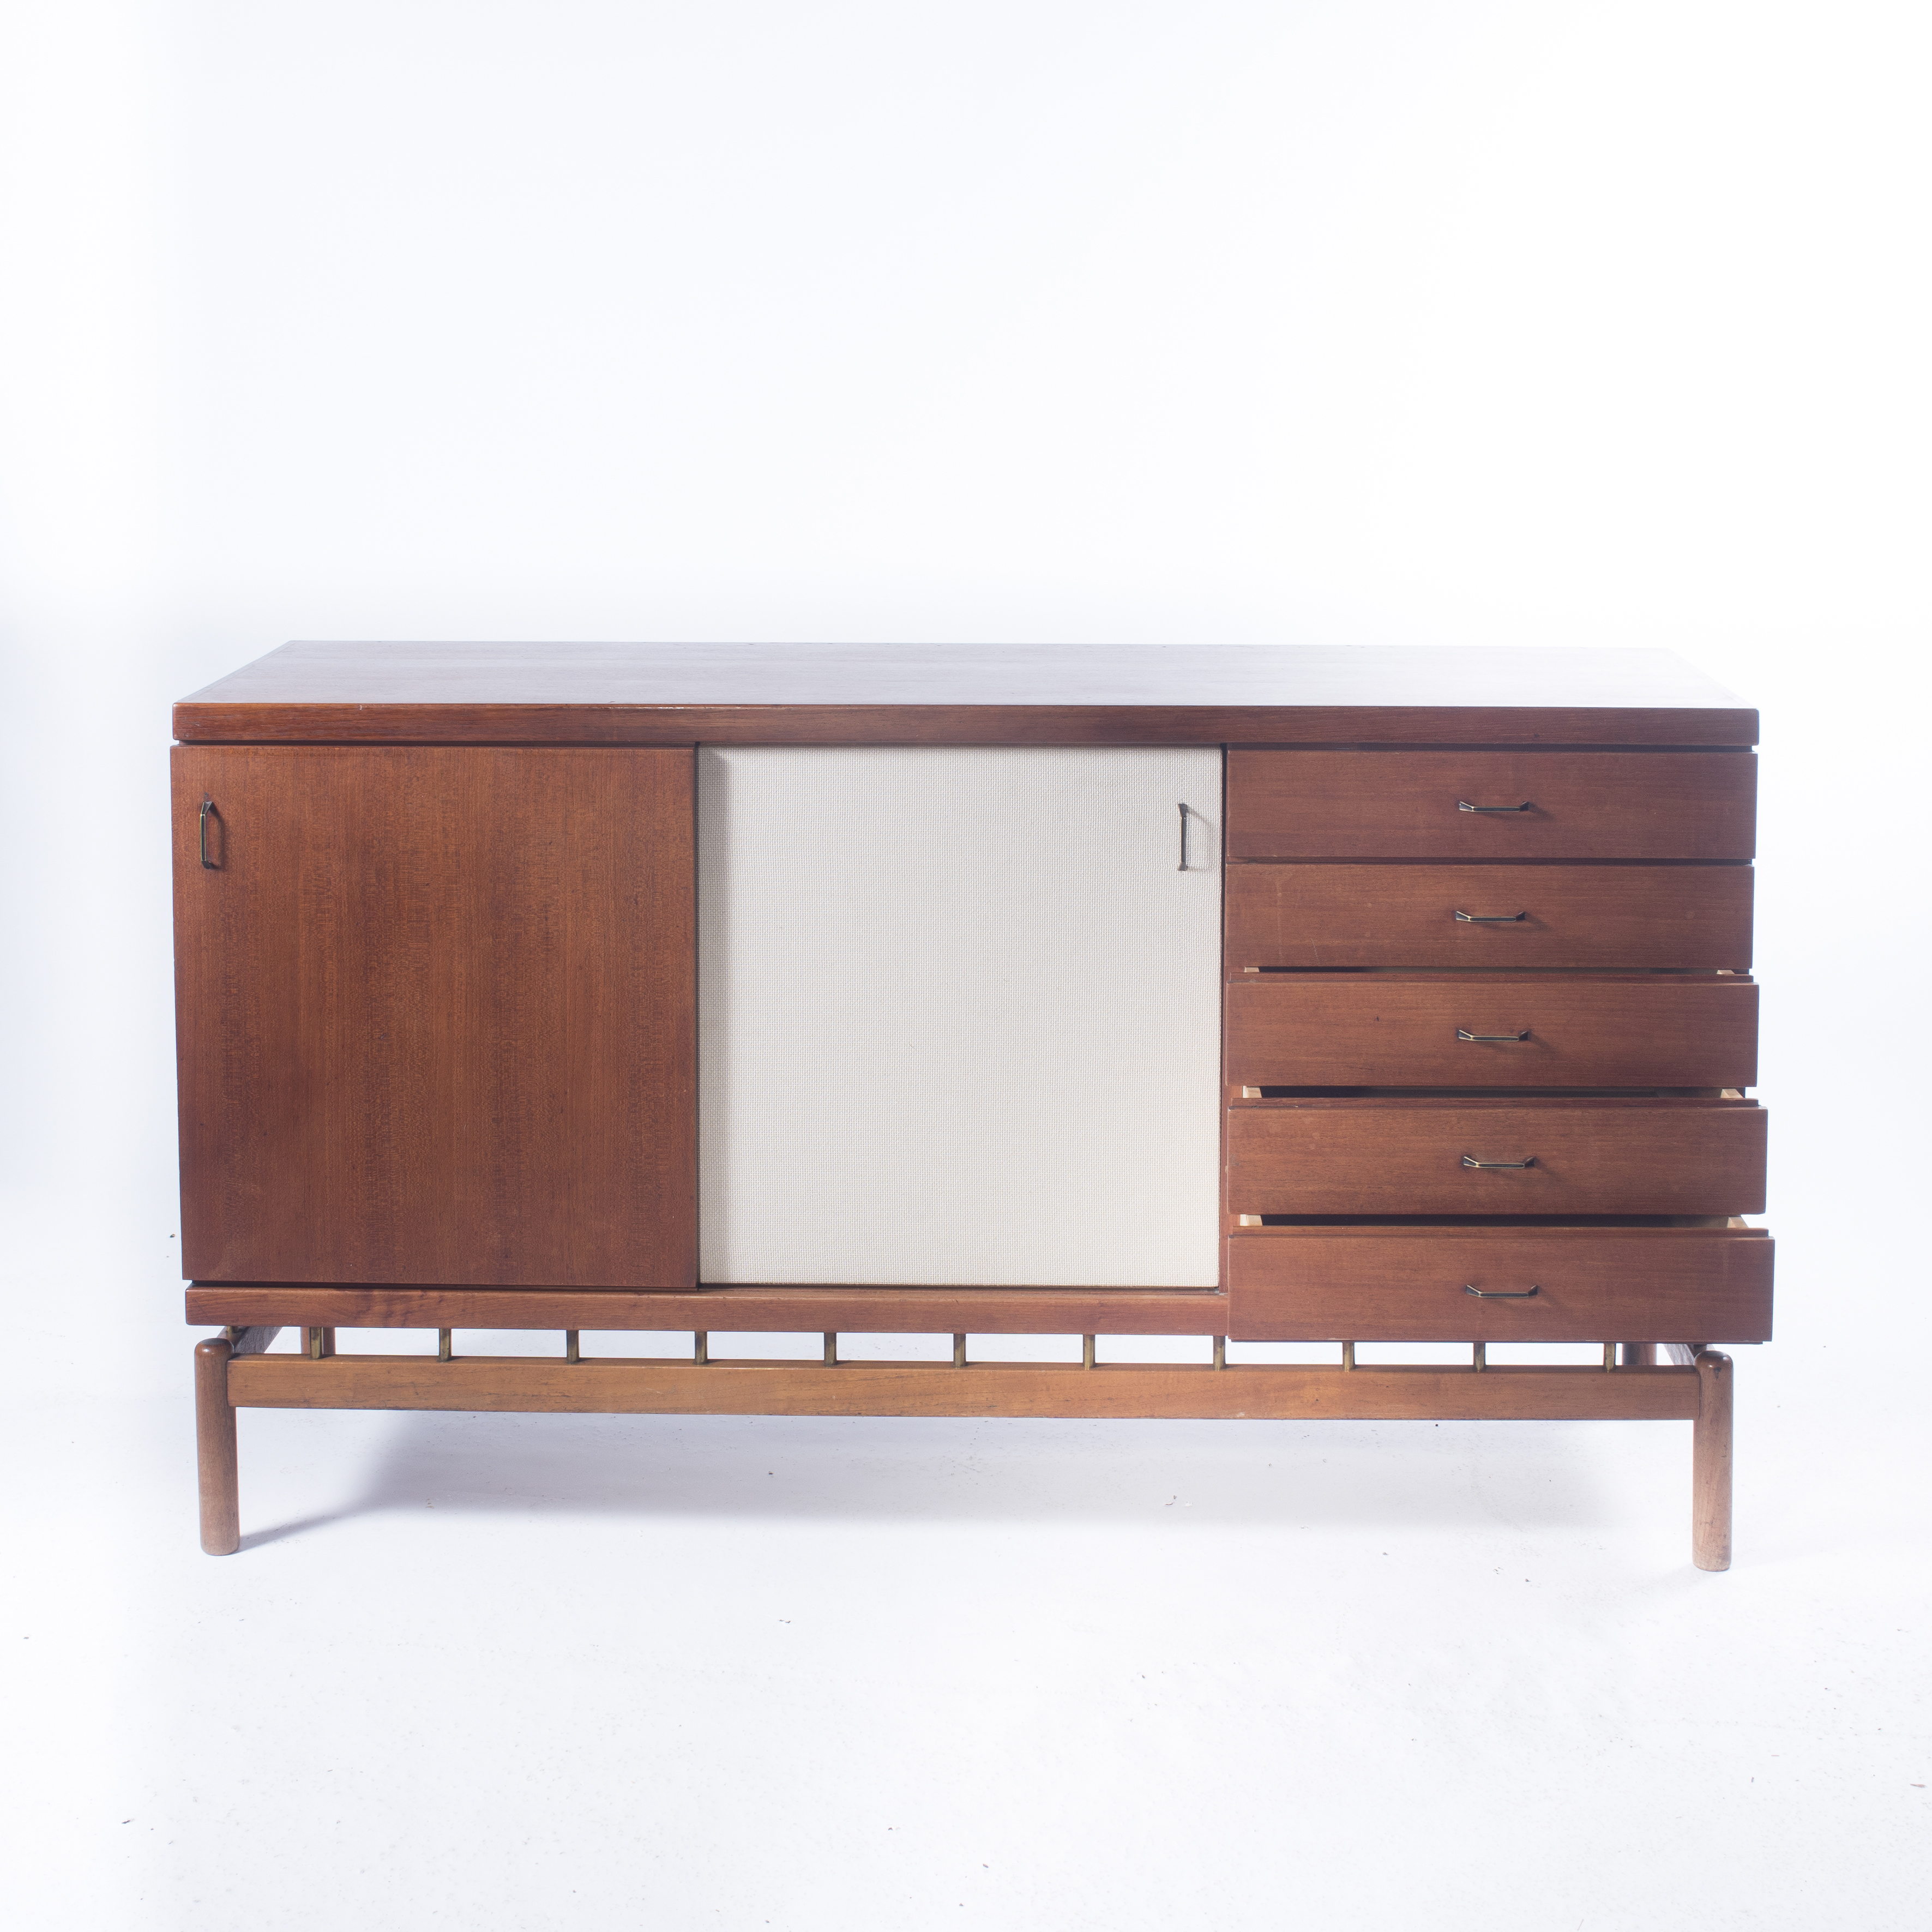 a31-rare-mid-century-modern-sideboard-by-tapiovaara-for-permanente-mobili-cant-italia-57